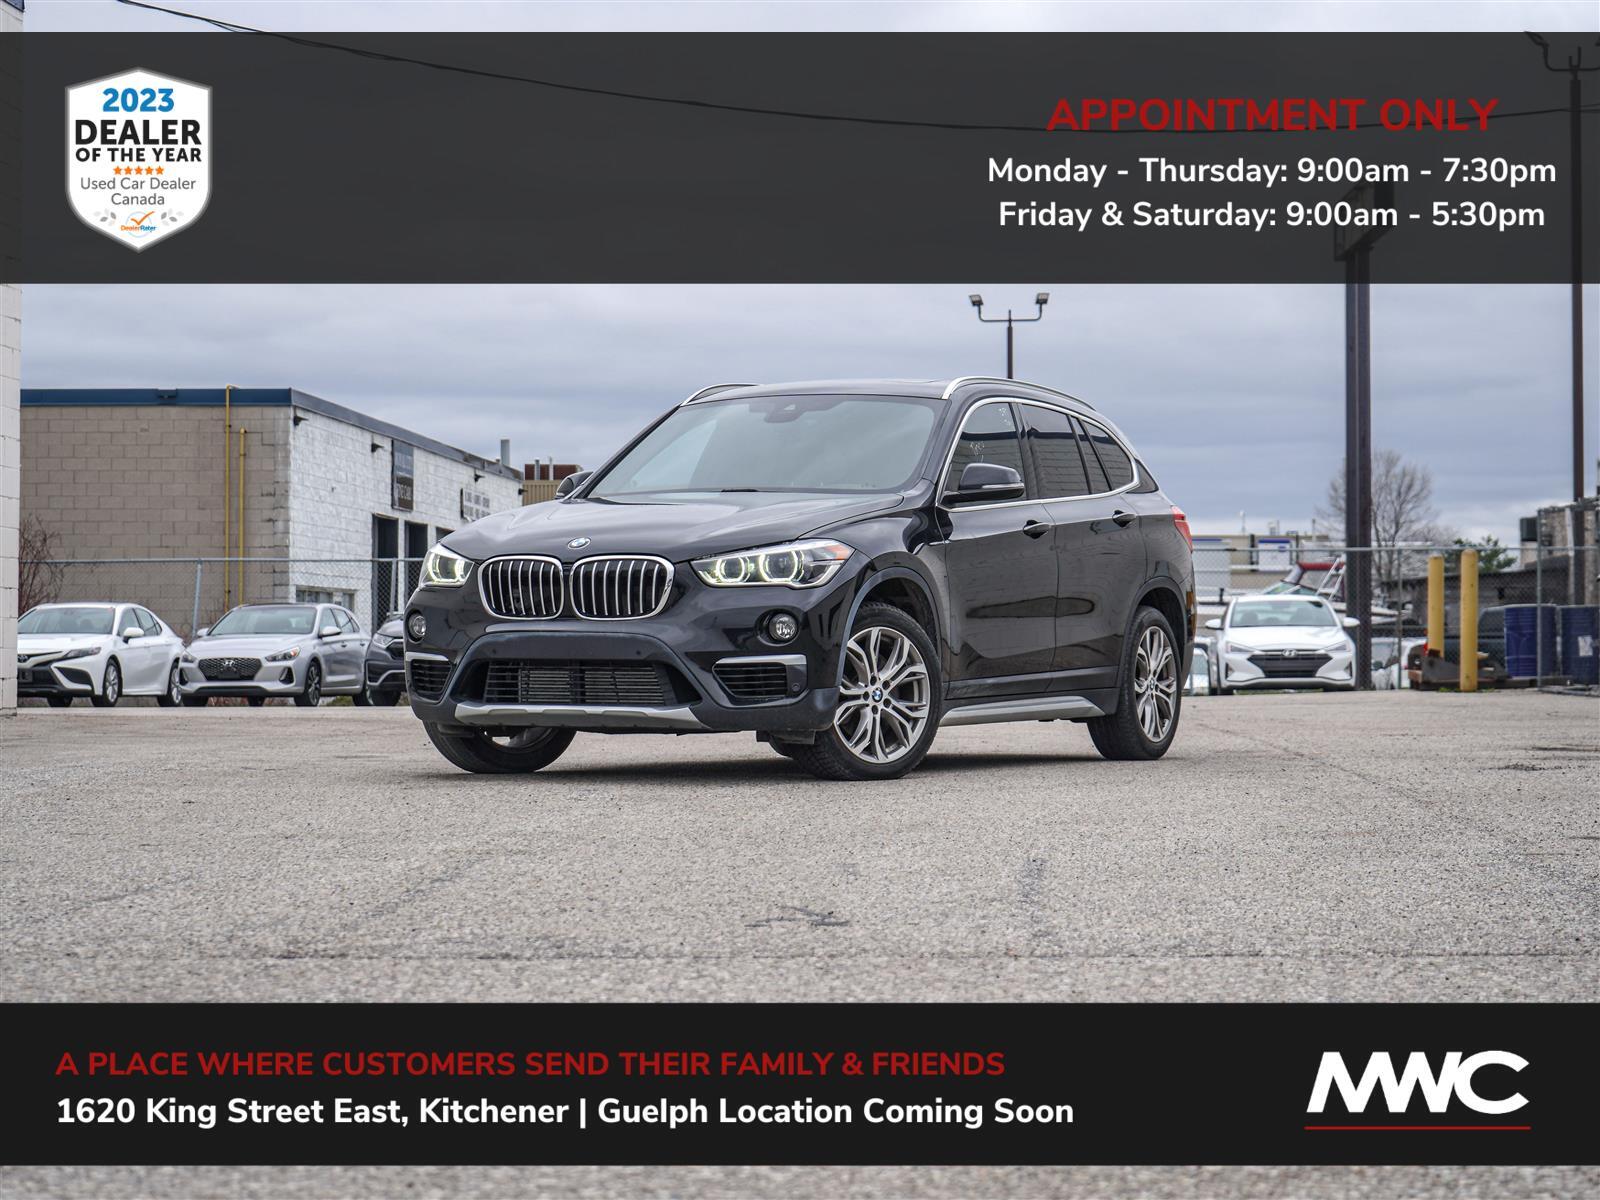 2019 BMW X1 XDRIVE28I | NAVIGATION | 17 IN GUELPH, BY APPT. ON